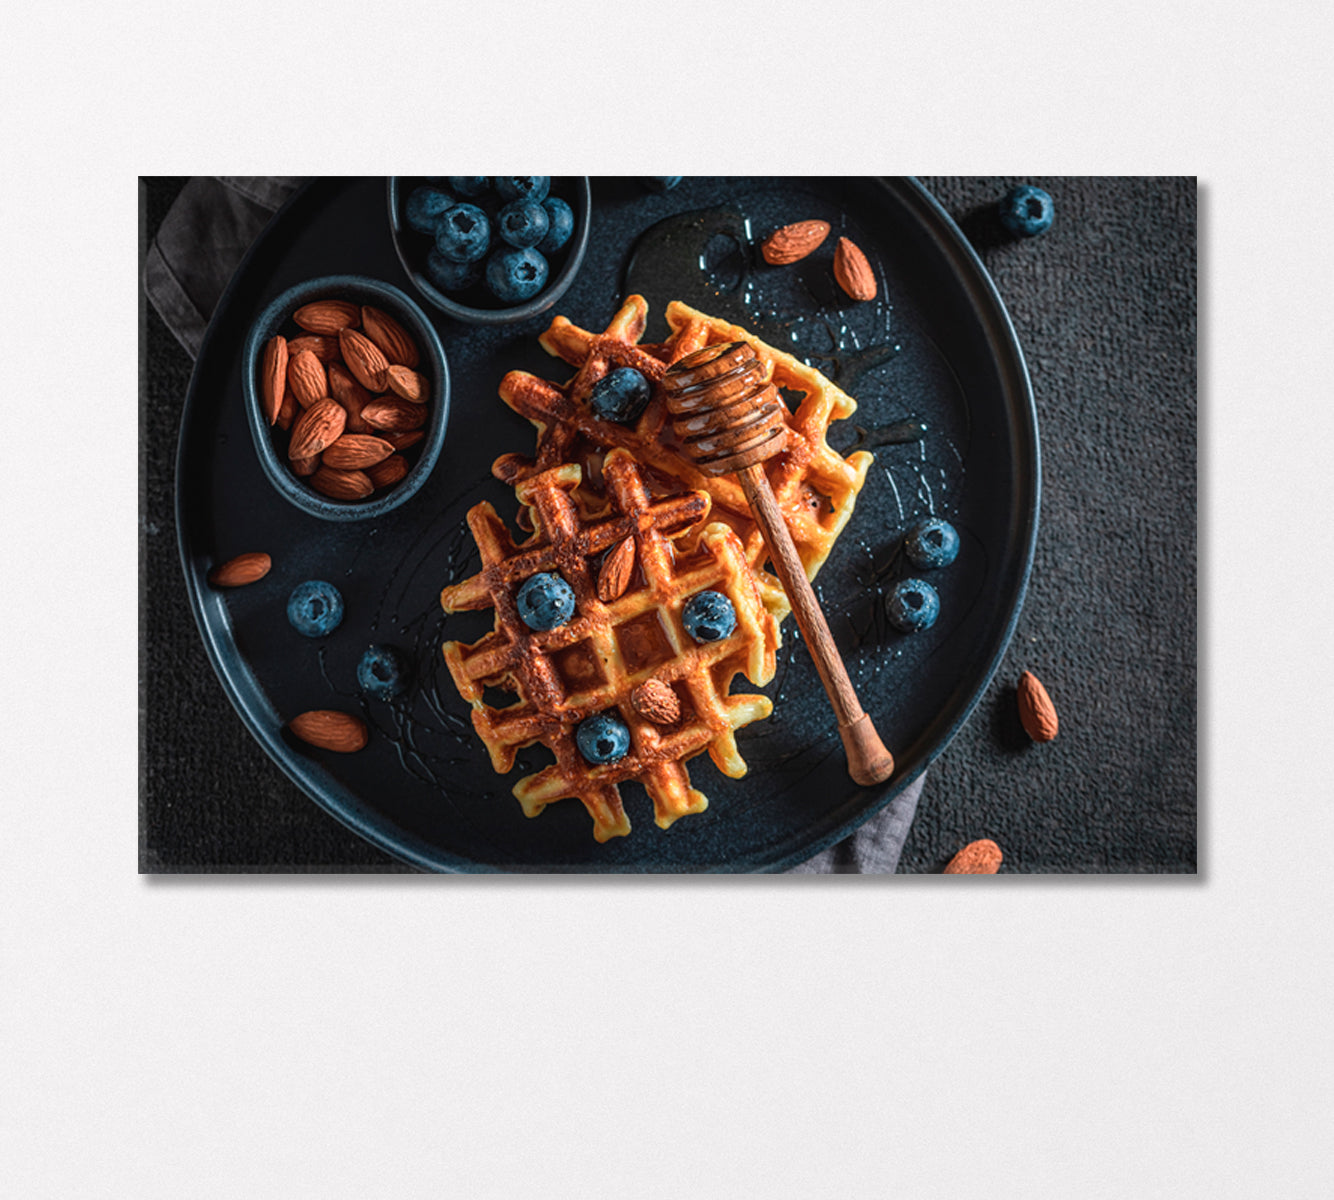 Belgian Waffles with Blueberries Honey and Almonds Canvas Print-Canvas Print-CetArt-1 Panel-24x16 inches-CetArt